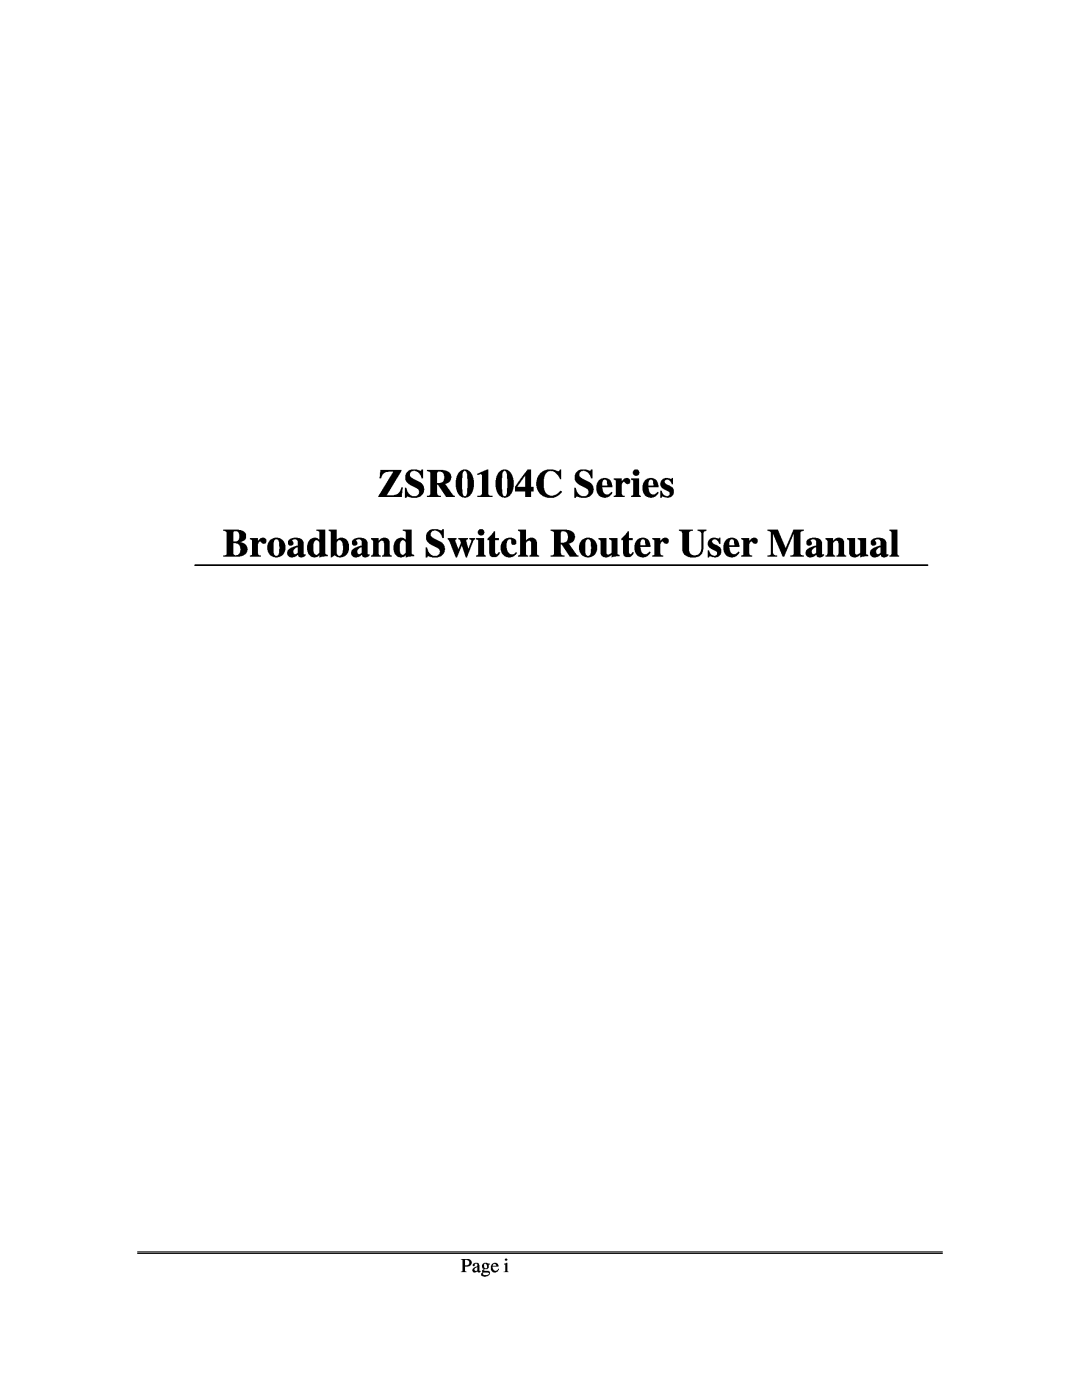 Zonet Technology user manual ZSR0104C Series Broadband Switch Router User Manual, Page 